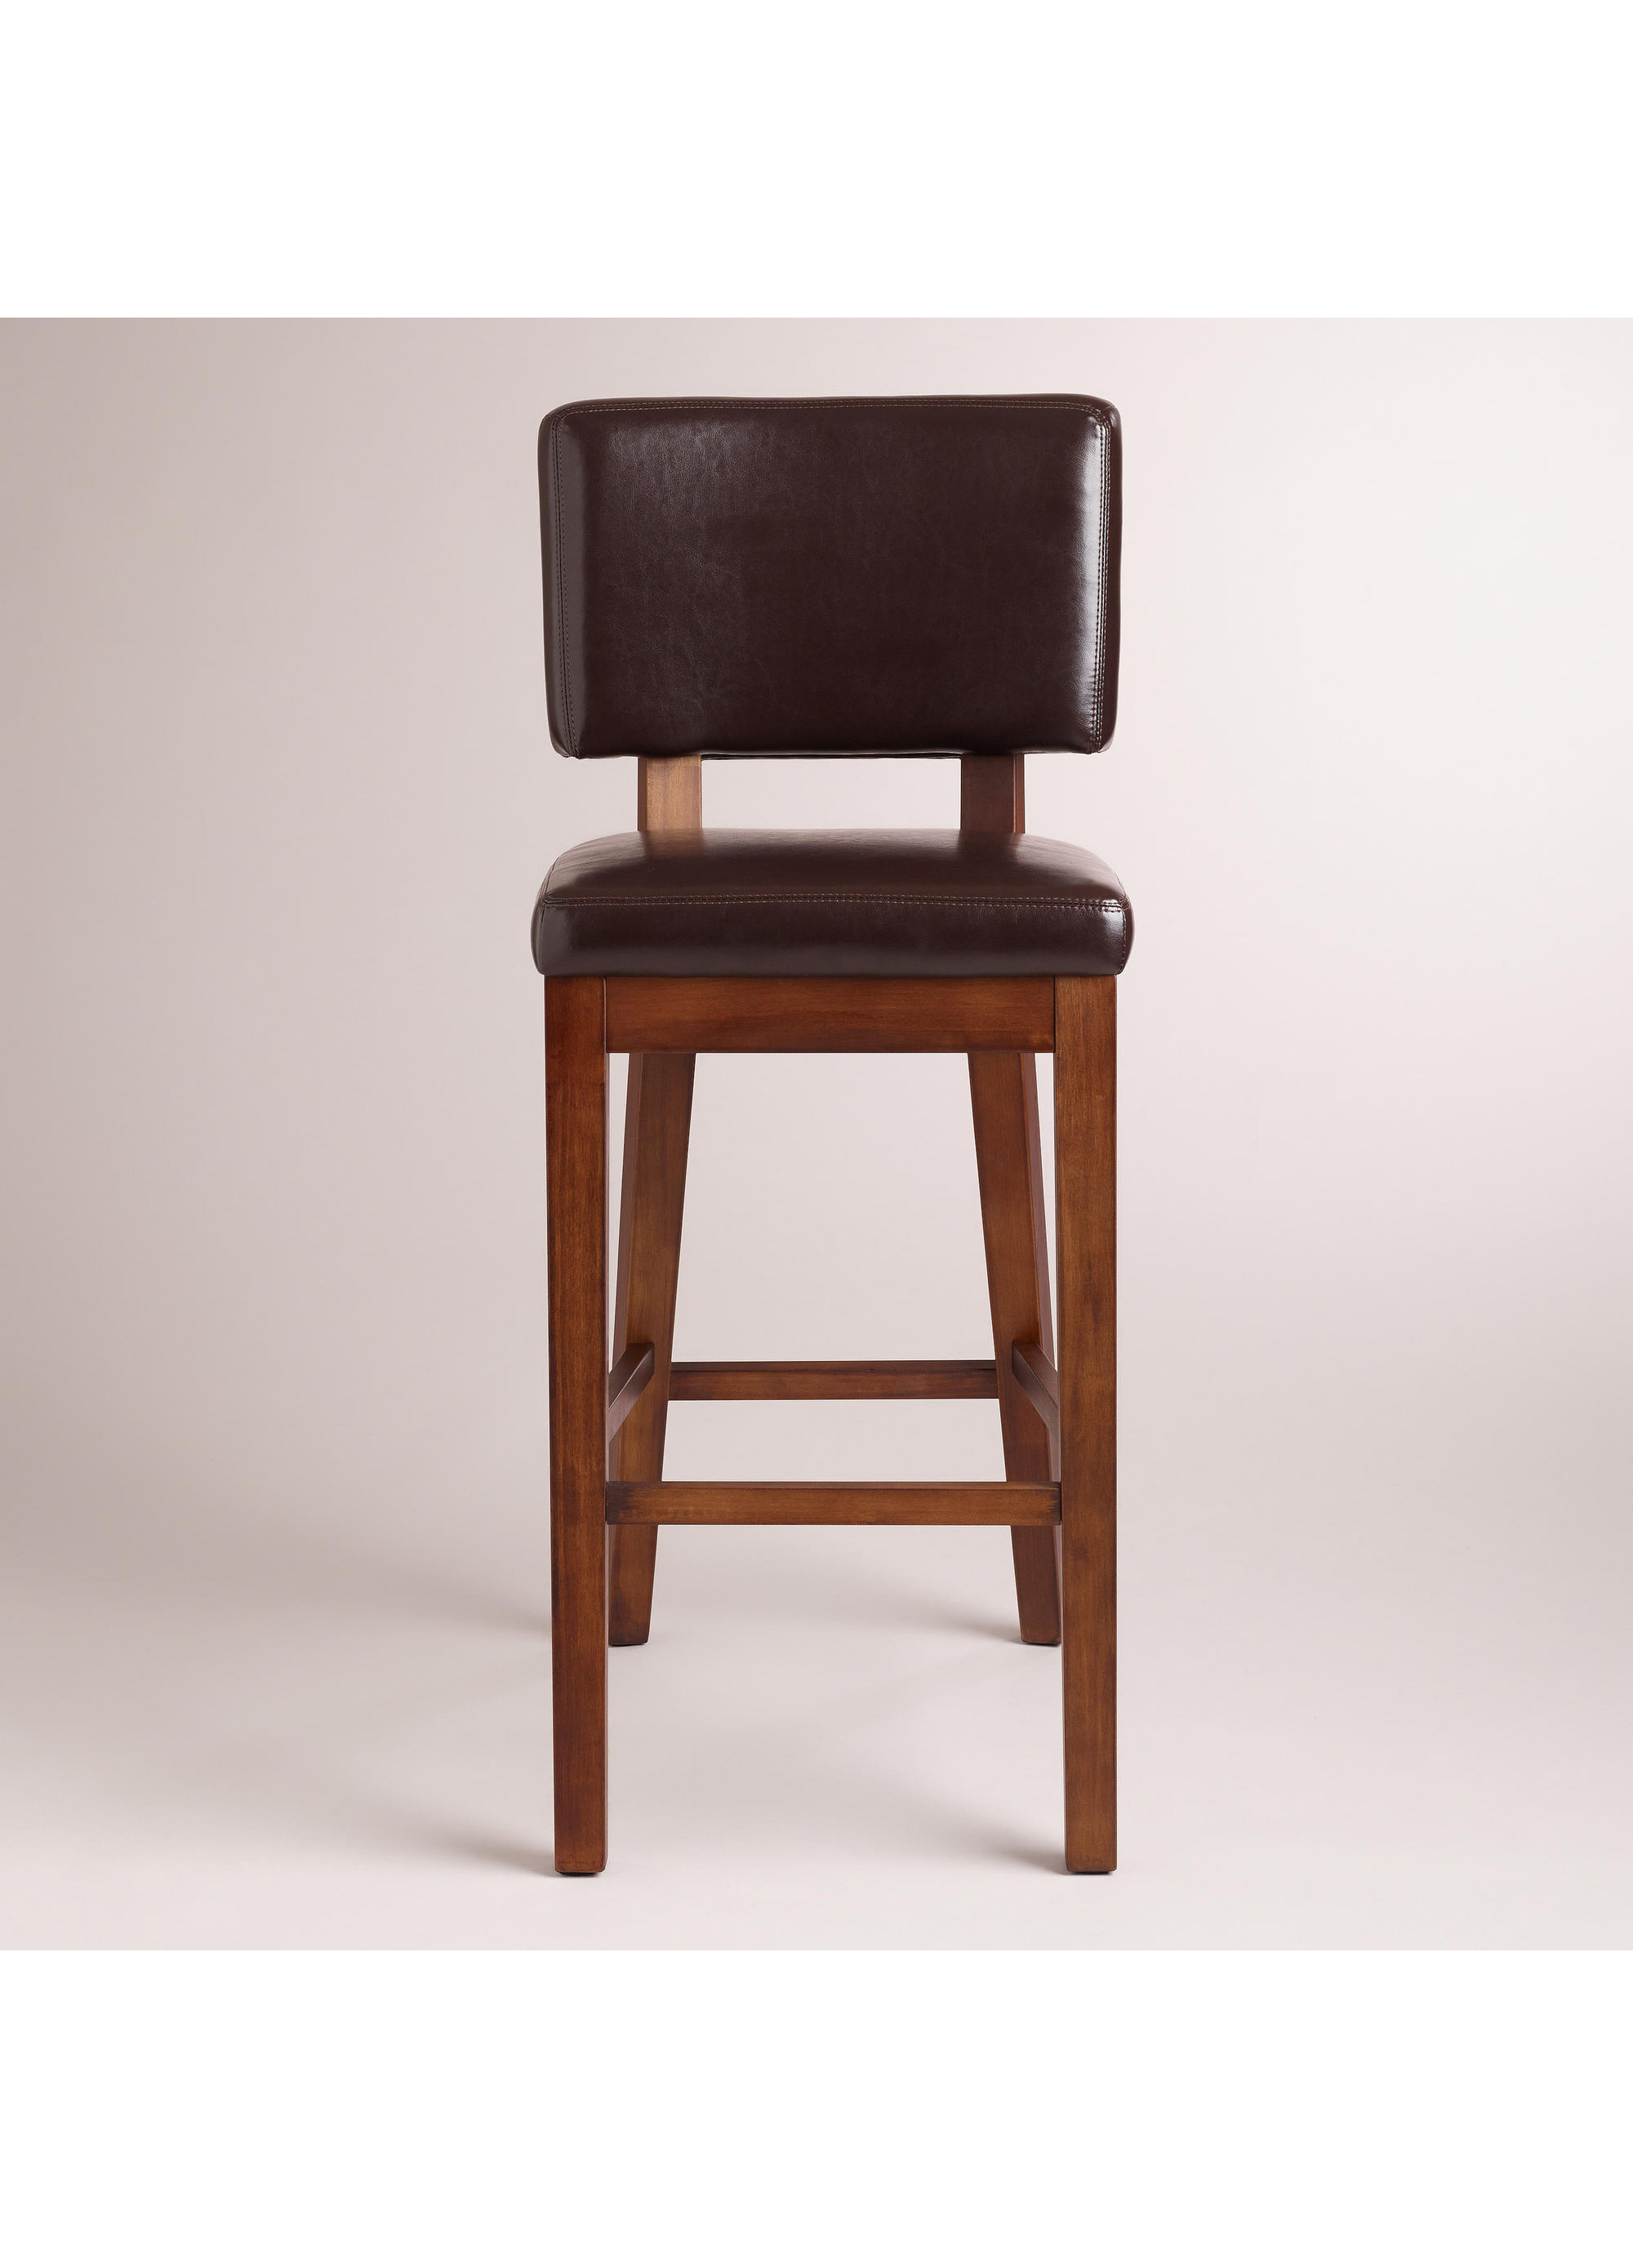 Best E1 Grade Plywood Leather Counter 30 Inch Height Bar Stools / Wooden Furniture For Restaurant wholesale